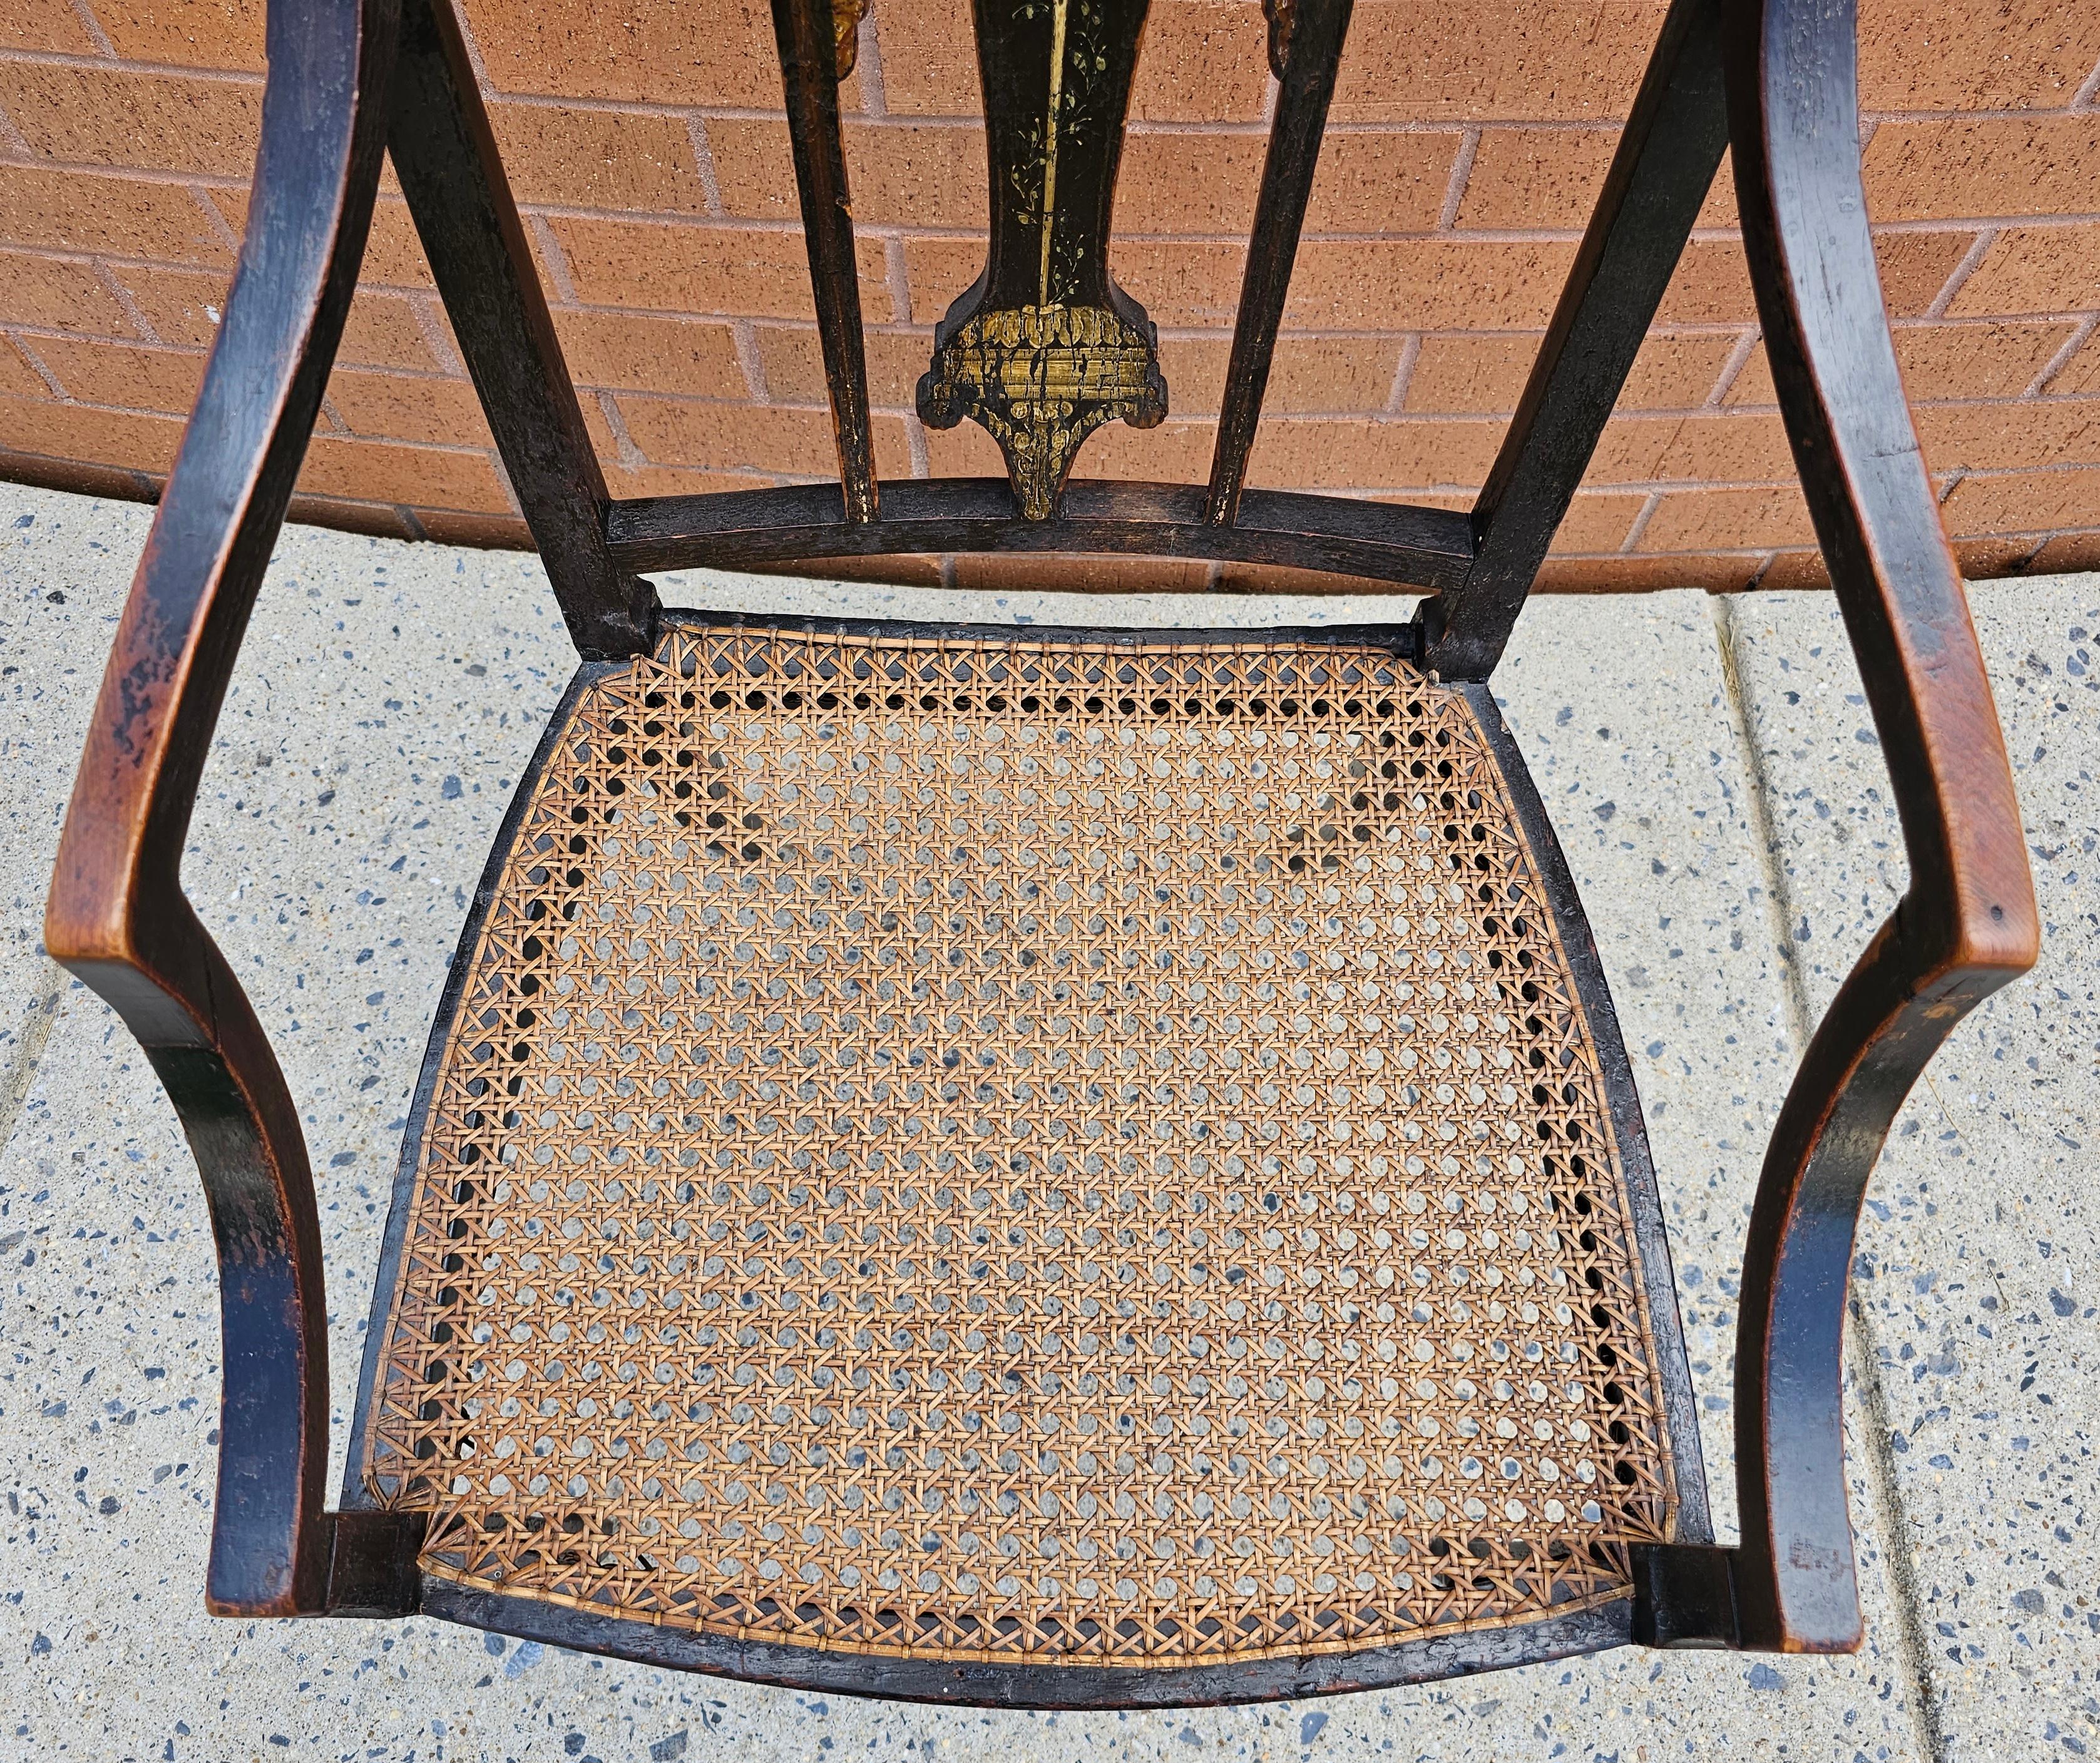 Chippendale 18th Century Ebonized and Inlays Decorated Cane Seat Armchair For Sale